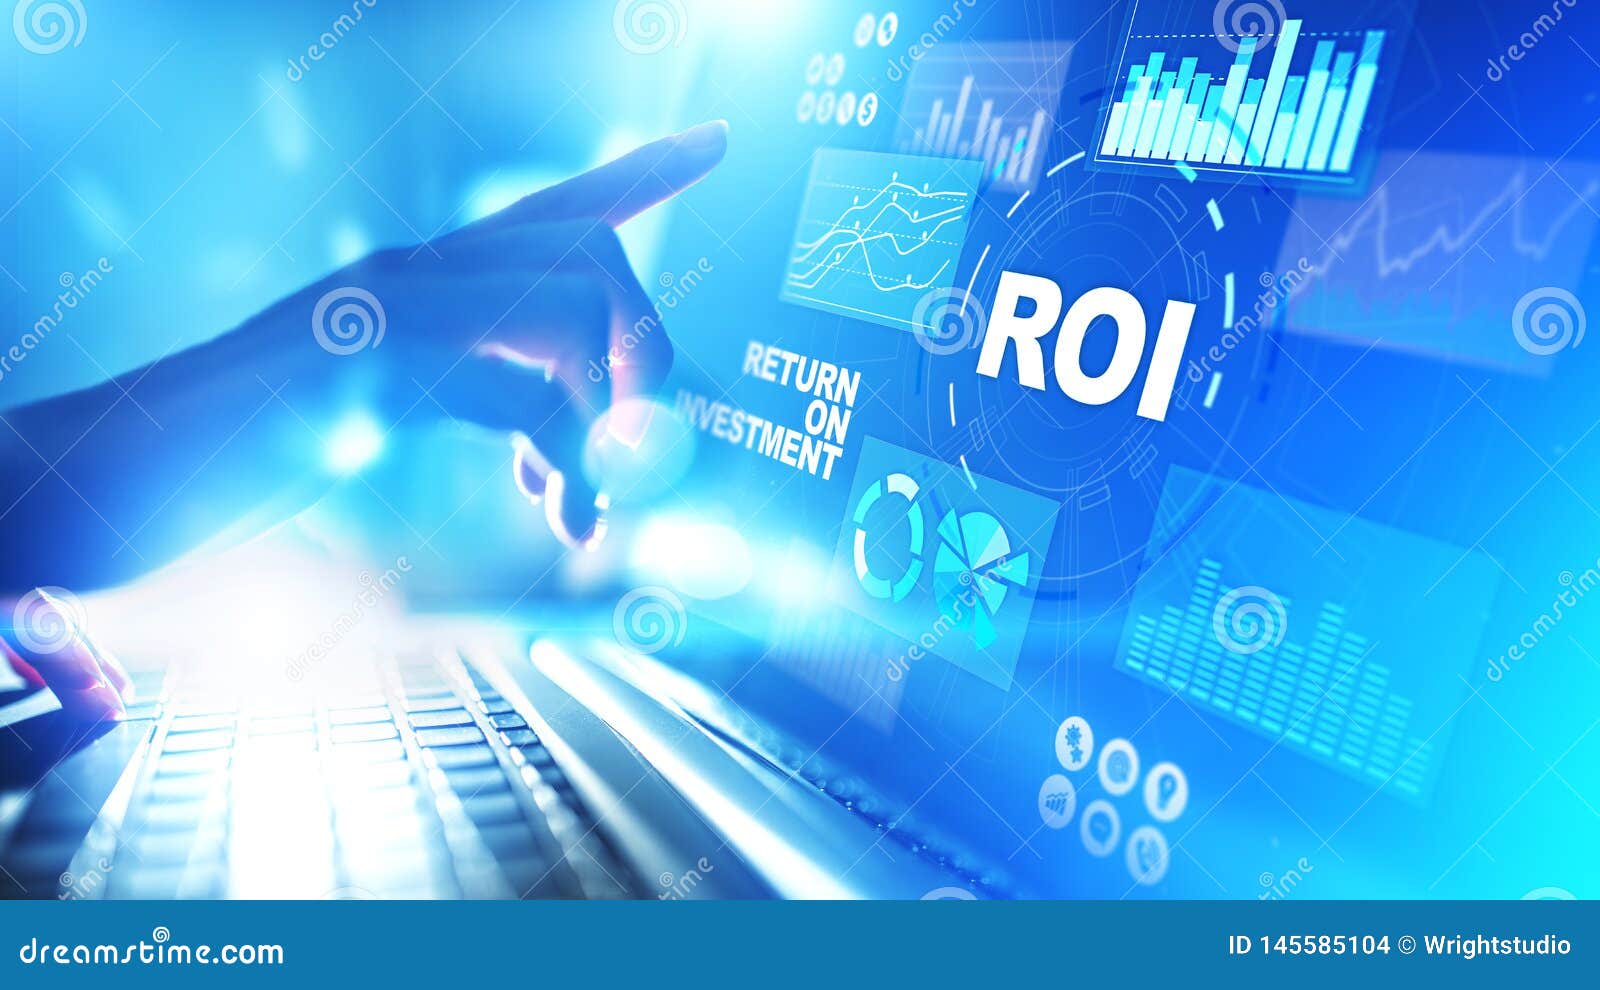 roi - return on investment, trading and financial growth concept on virtual screen.